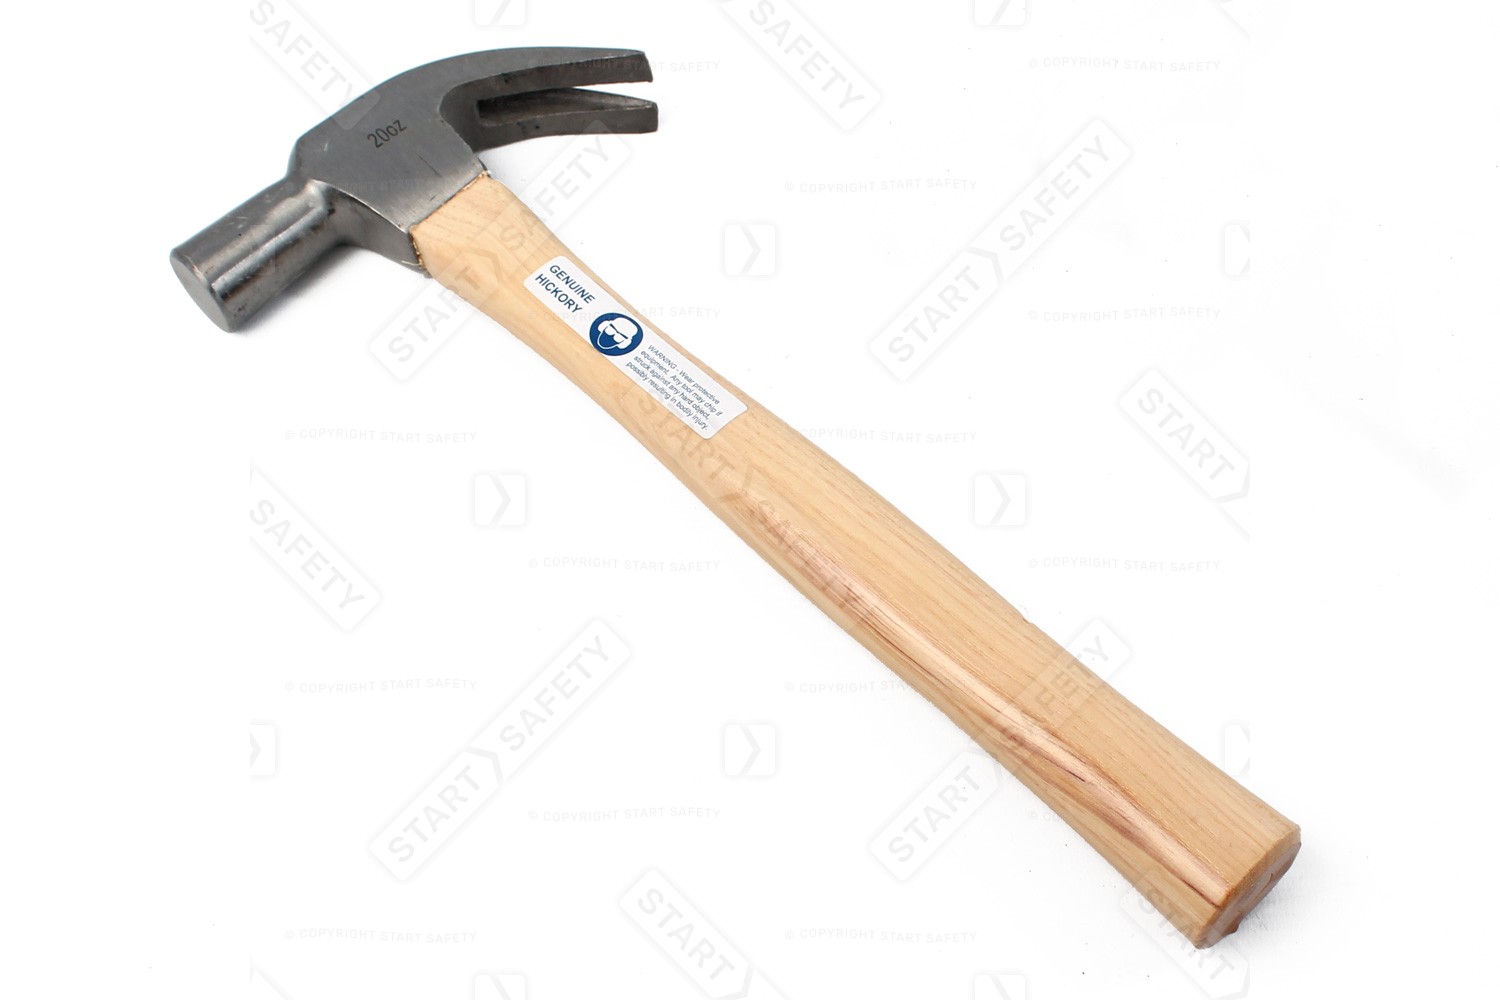 Hickory Shafted Claw Hammer